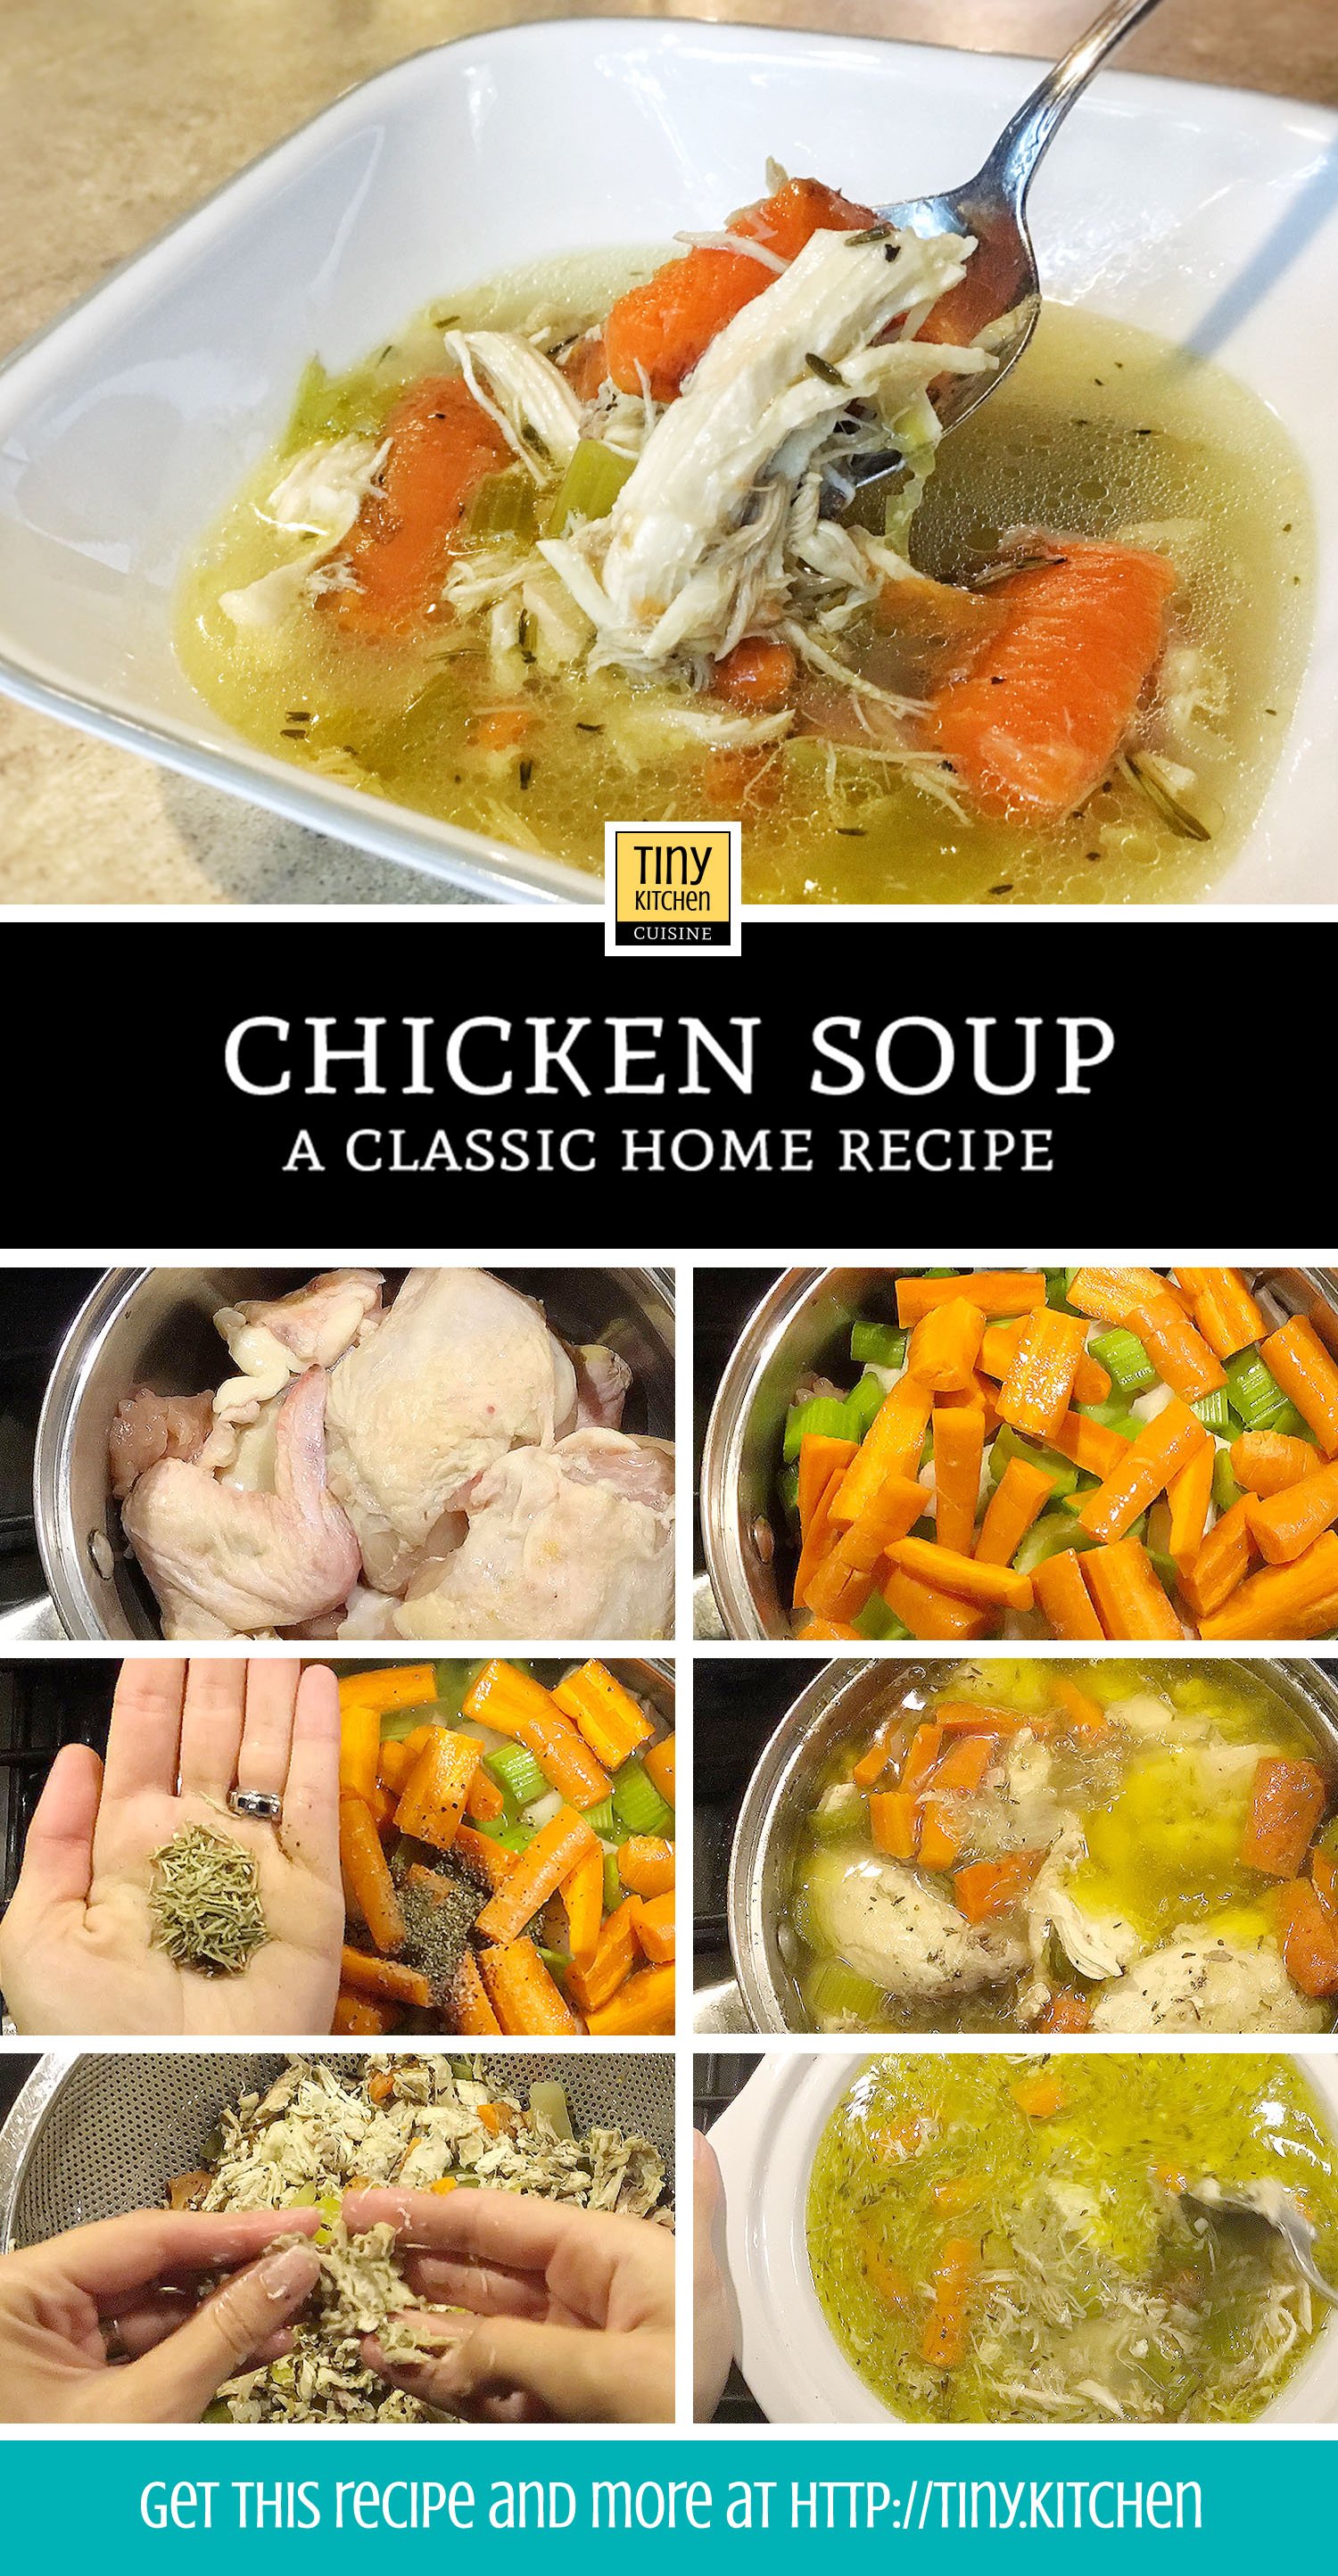 This chicken soup recipe is the granddaddy of all soup recipes! Grab a bowl of this delicious soup straight from the pot or add noodles for a homemade chicken noodle soup. | Tiny Kitchen Cuisine | http://tiny.kitchen